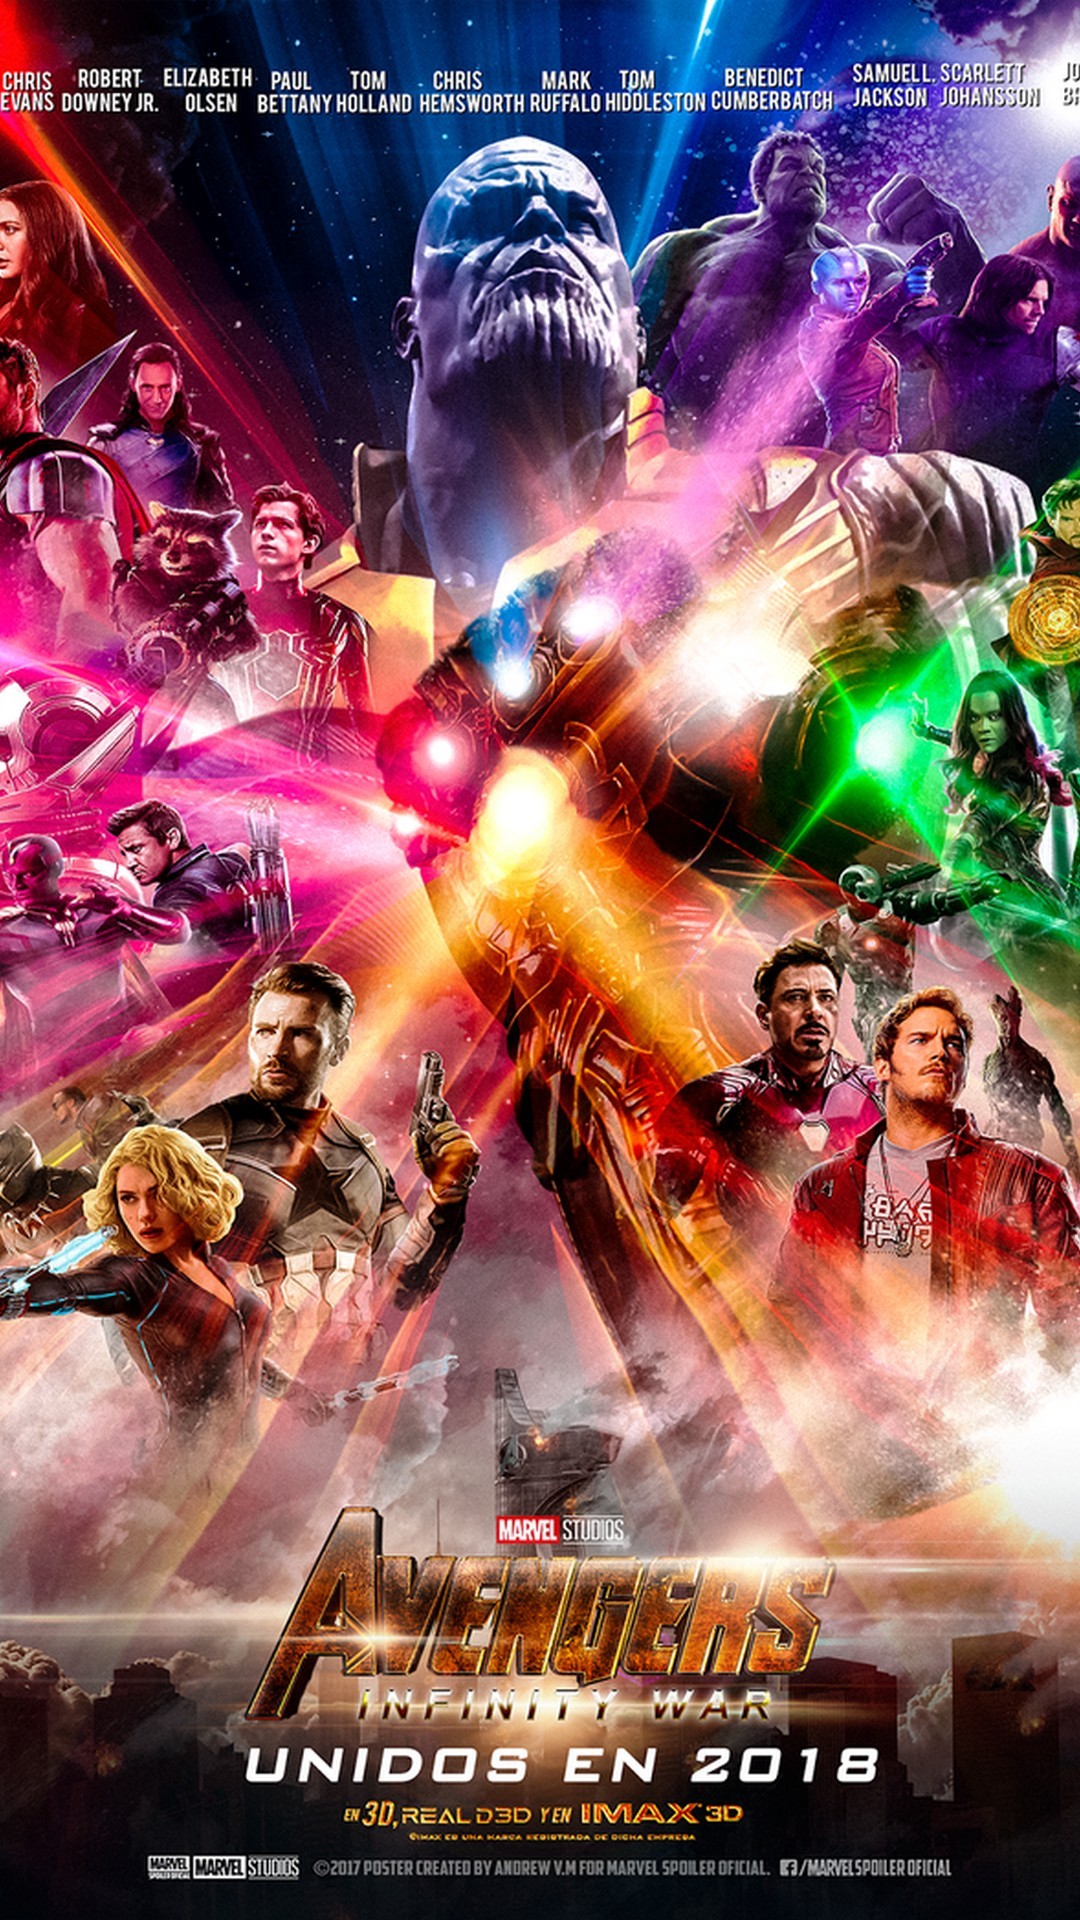 Wallpaper Avengers 3 Android with HD resolution 1080x1920